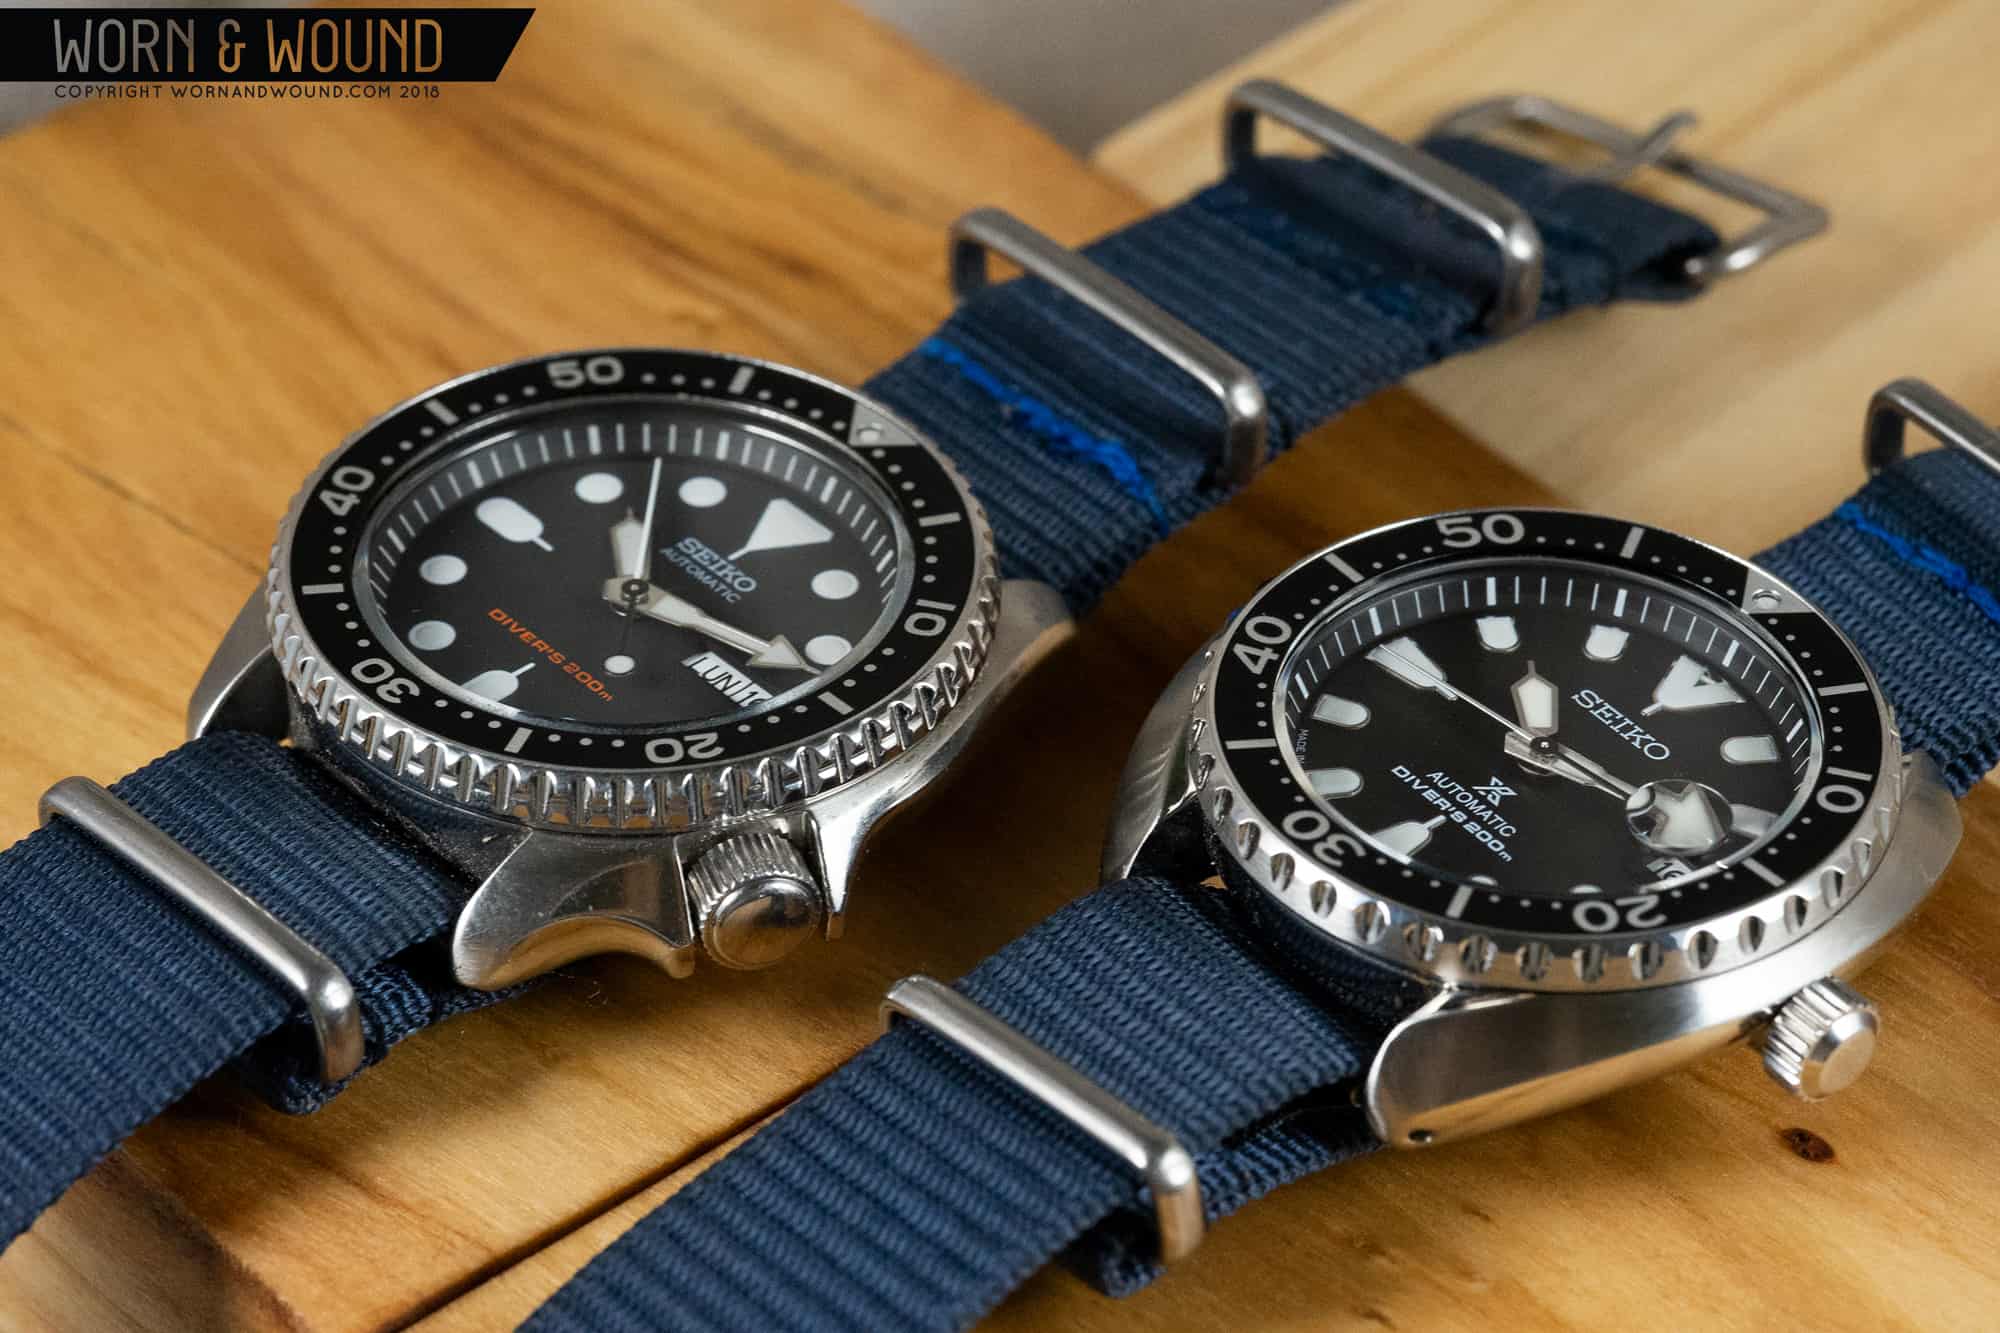 Worn Wound Review Is the Seiko  Mini  Turtle the New 